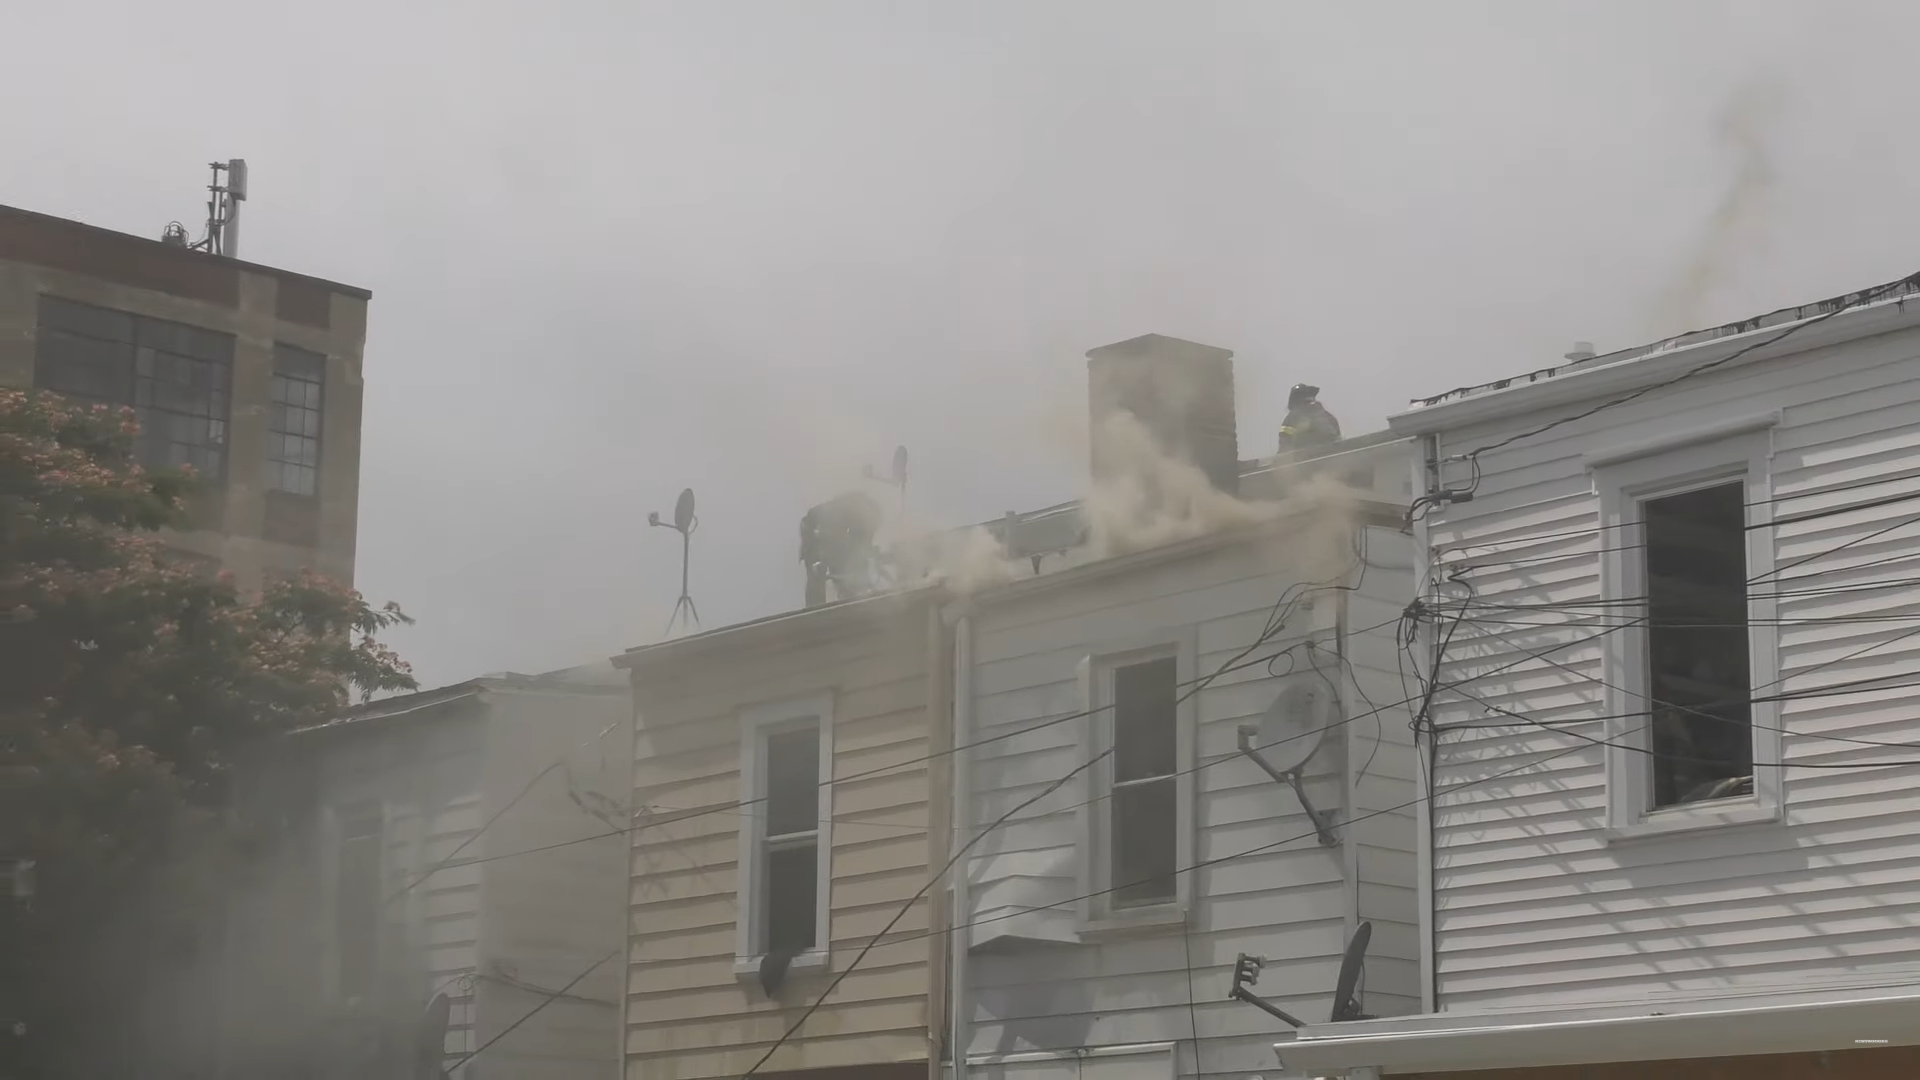 You are currently viewing Utility pole fall and sparks fire across roofs of seven rowhomes